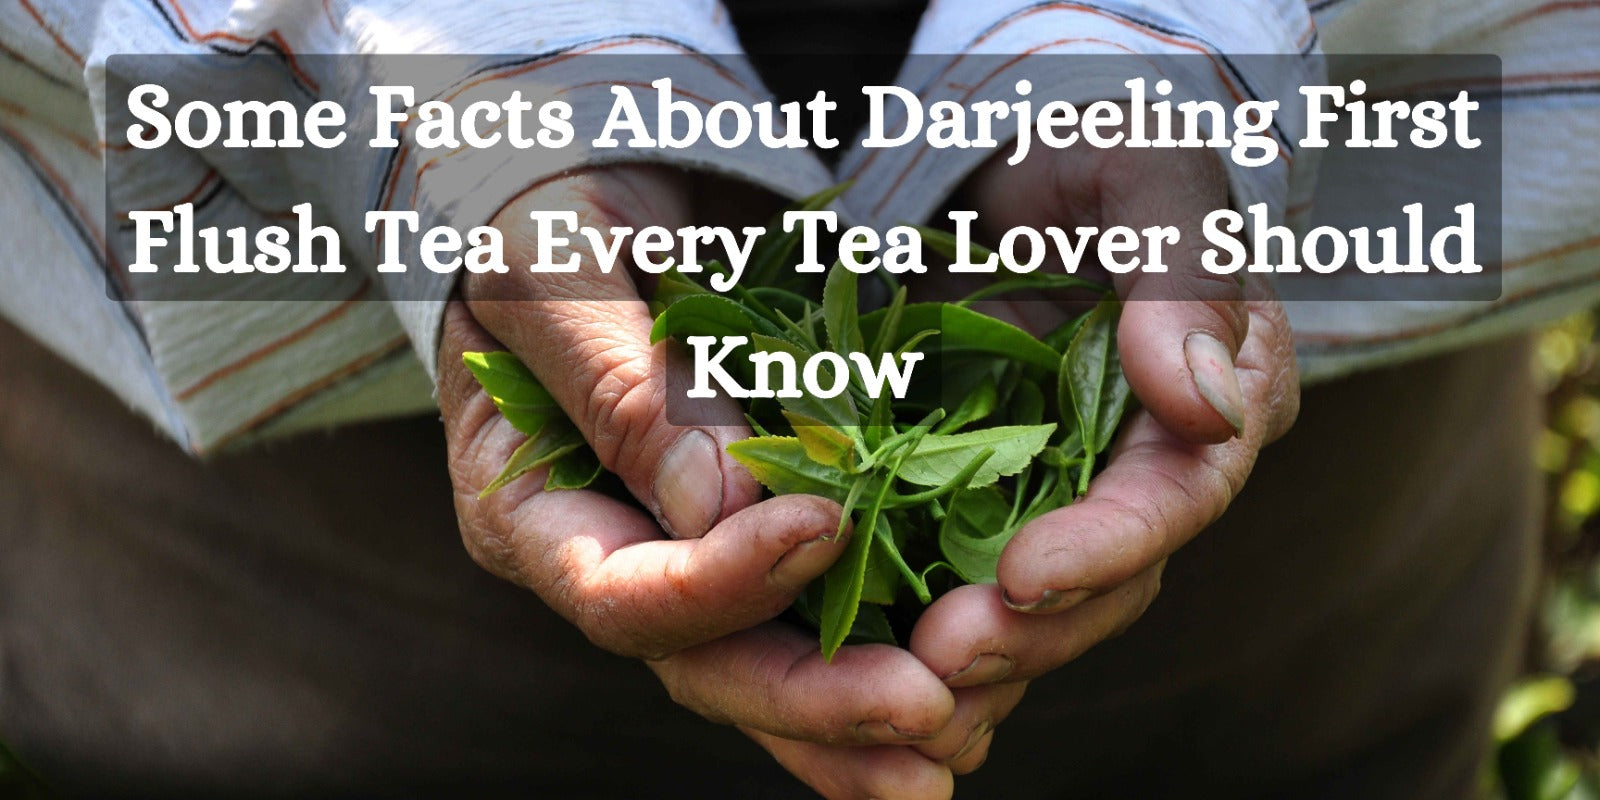 Some Facts About Darjeeling First Flush Tea Every Tea Lover Should Know